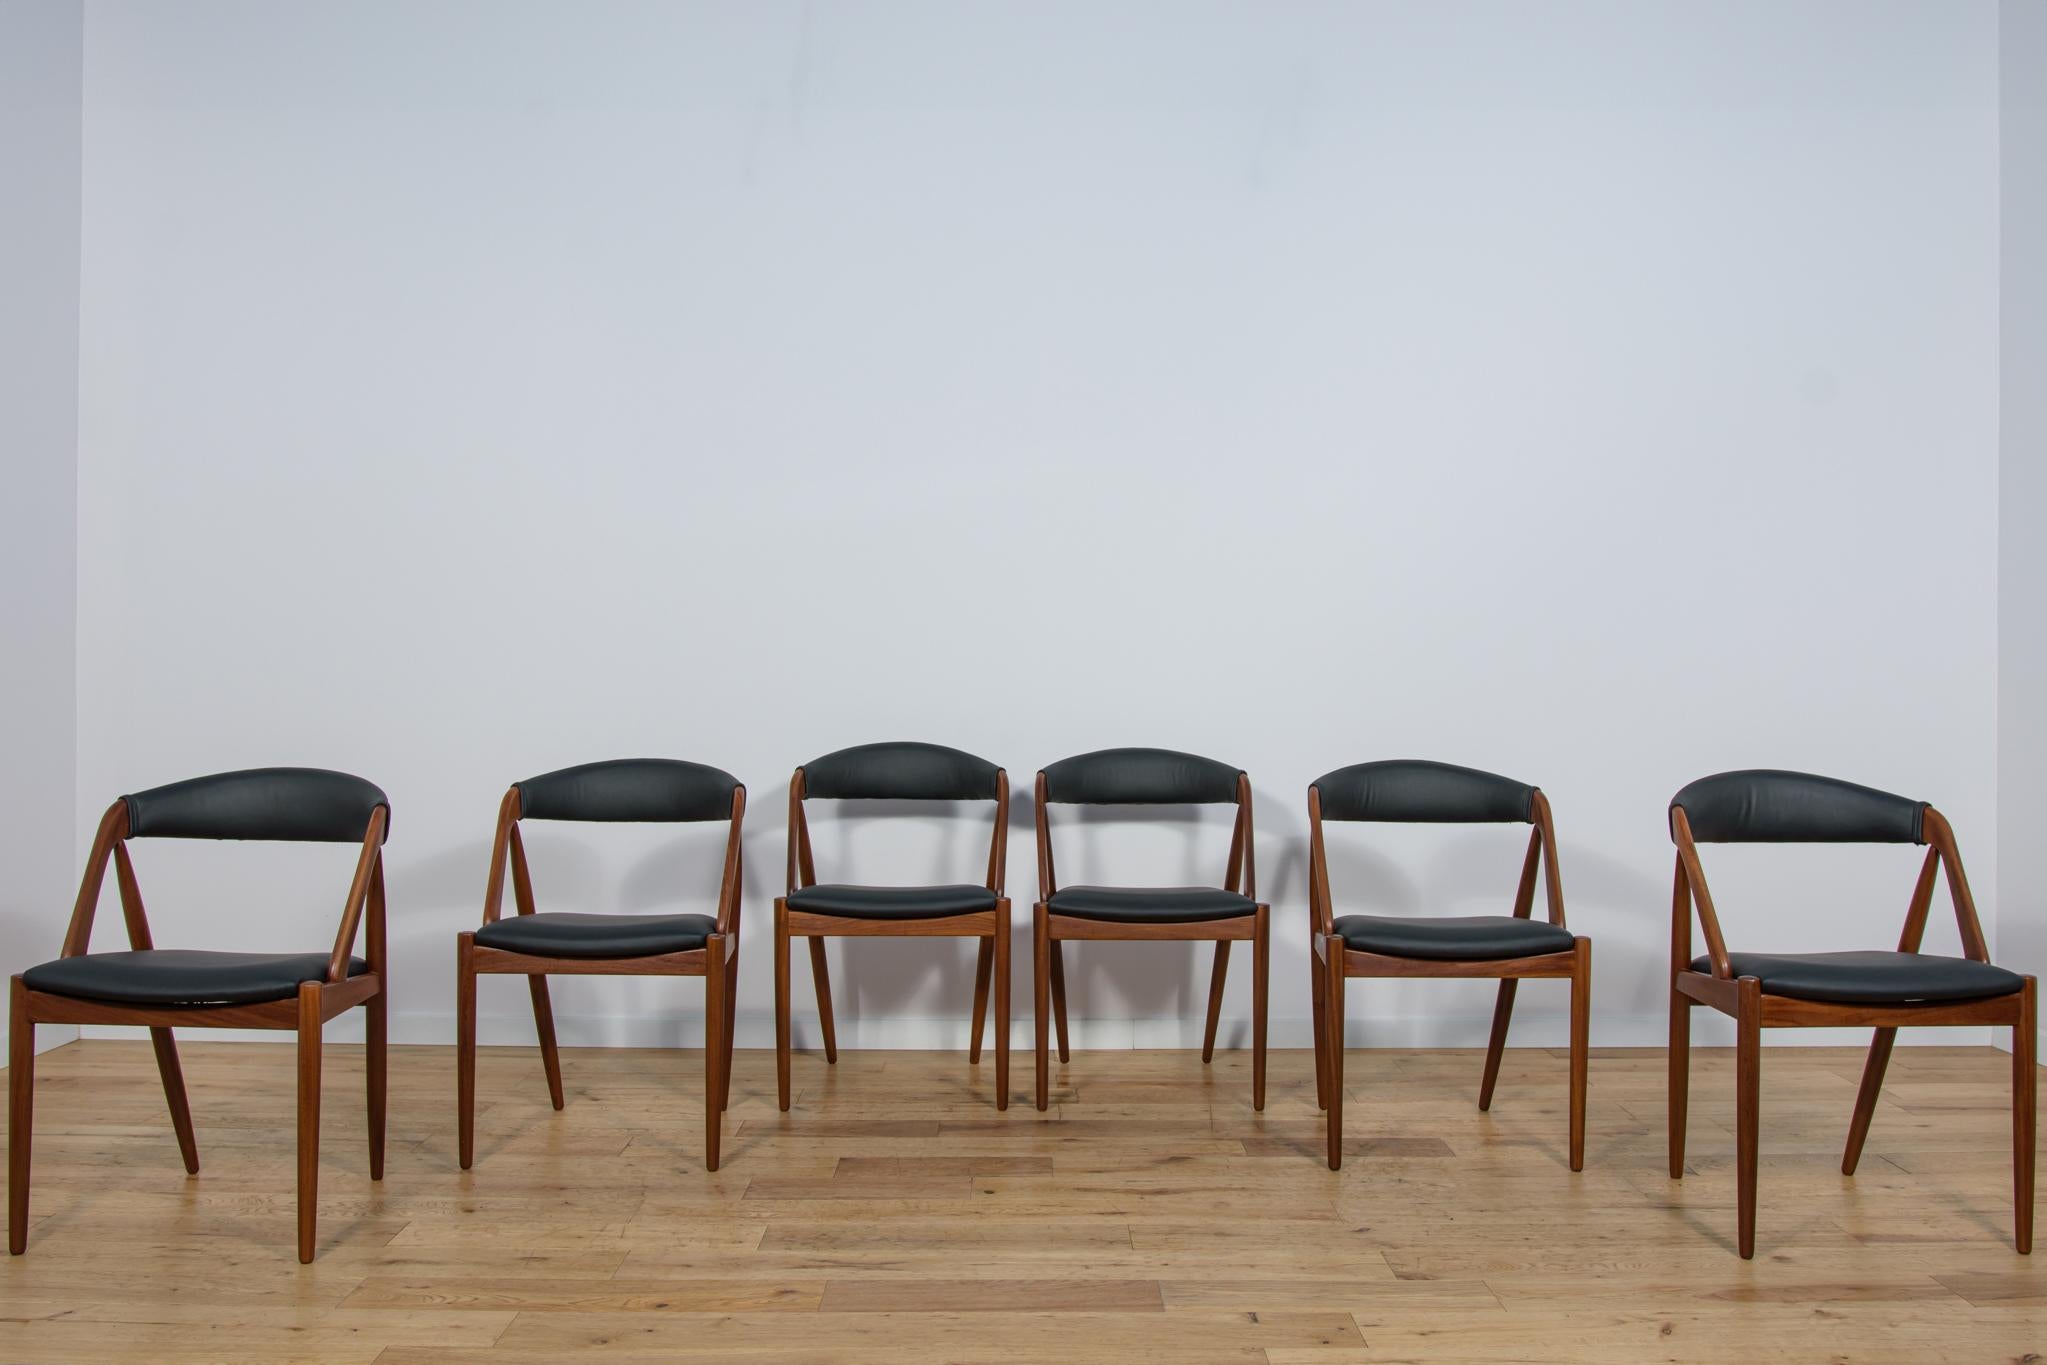 Woodwork Model 31 Dining Chairs by Kai Kristiansen for Schou Andersen, Denmark, 1960s. For Sale